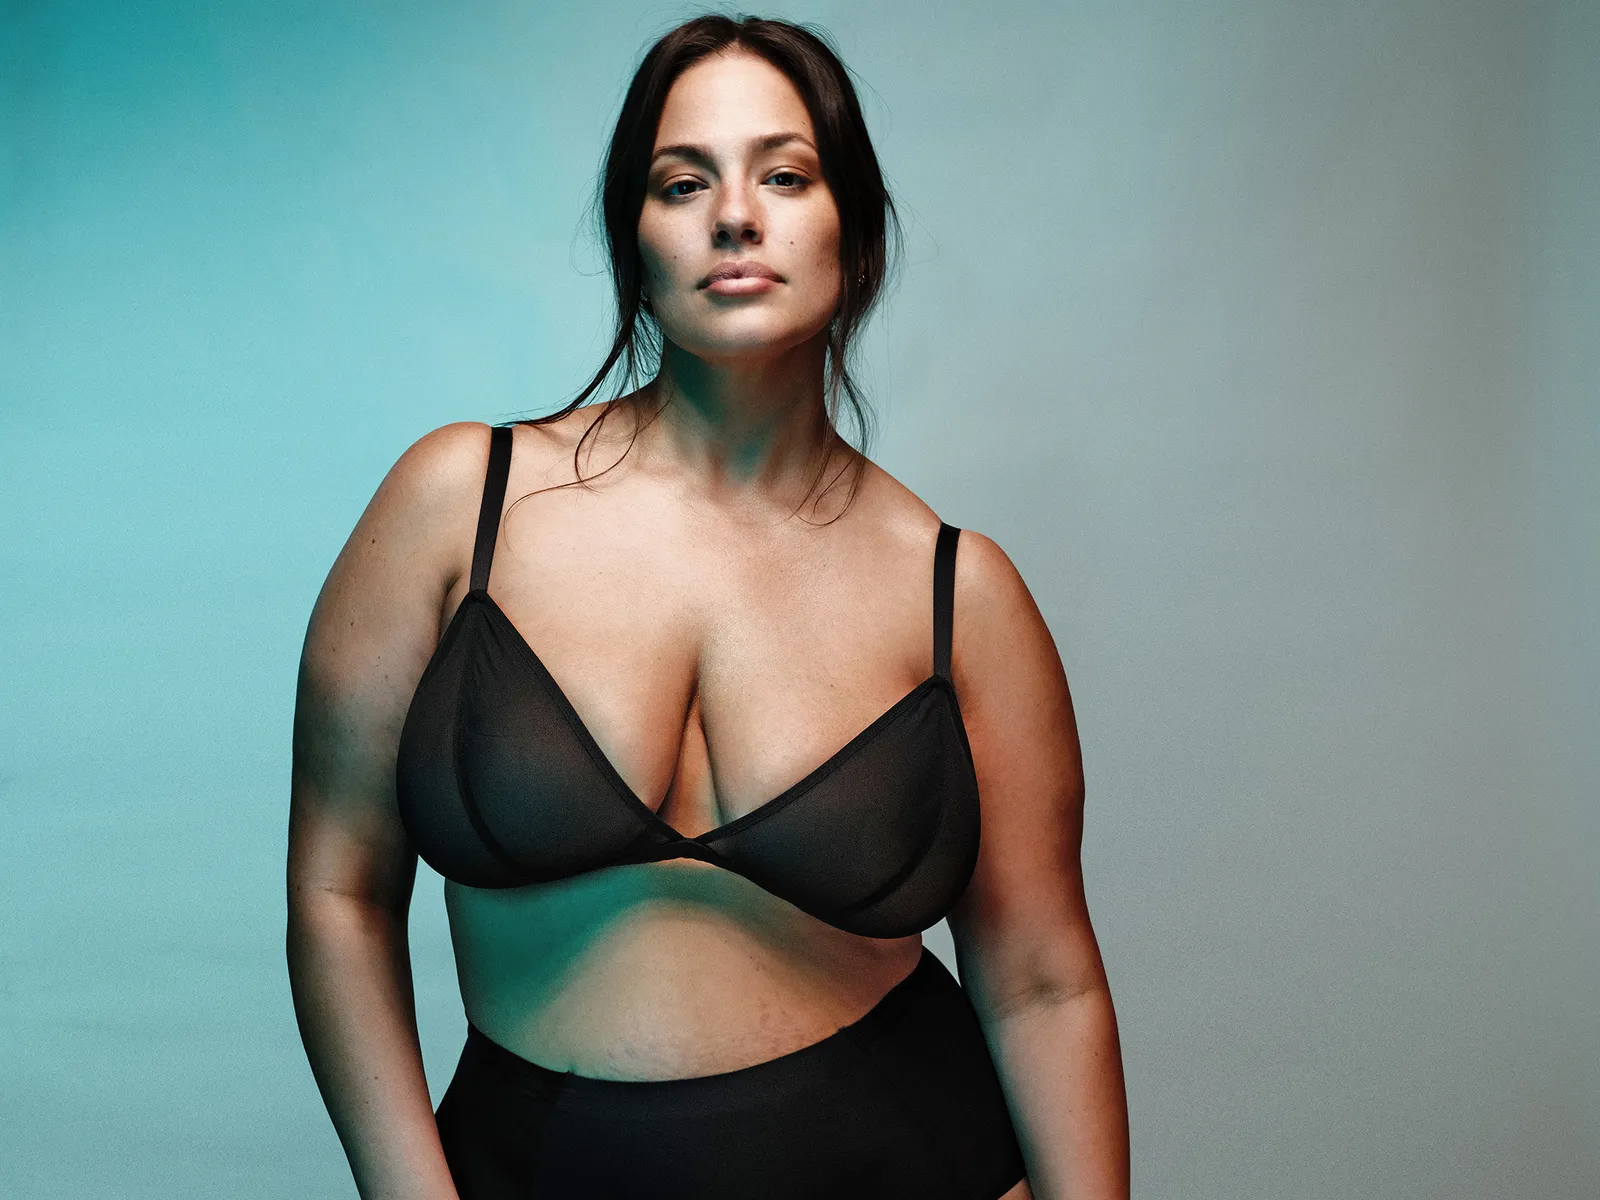 ”the-most-famous-plus-size-model-ashley-graham-showed-a-new-collection-of-spectacular-underwear-which-she-made-herself”